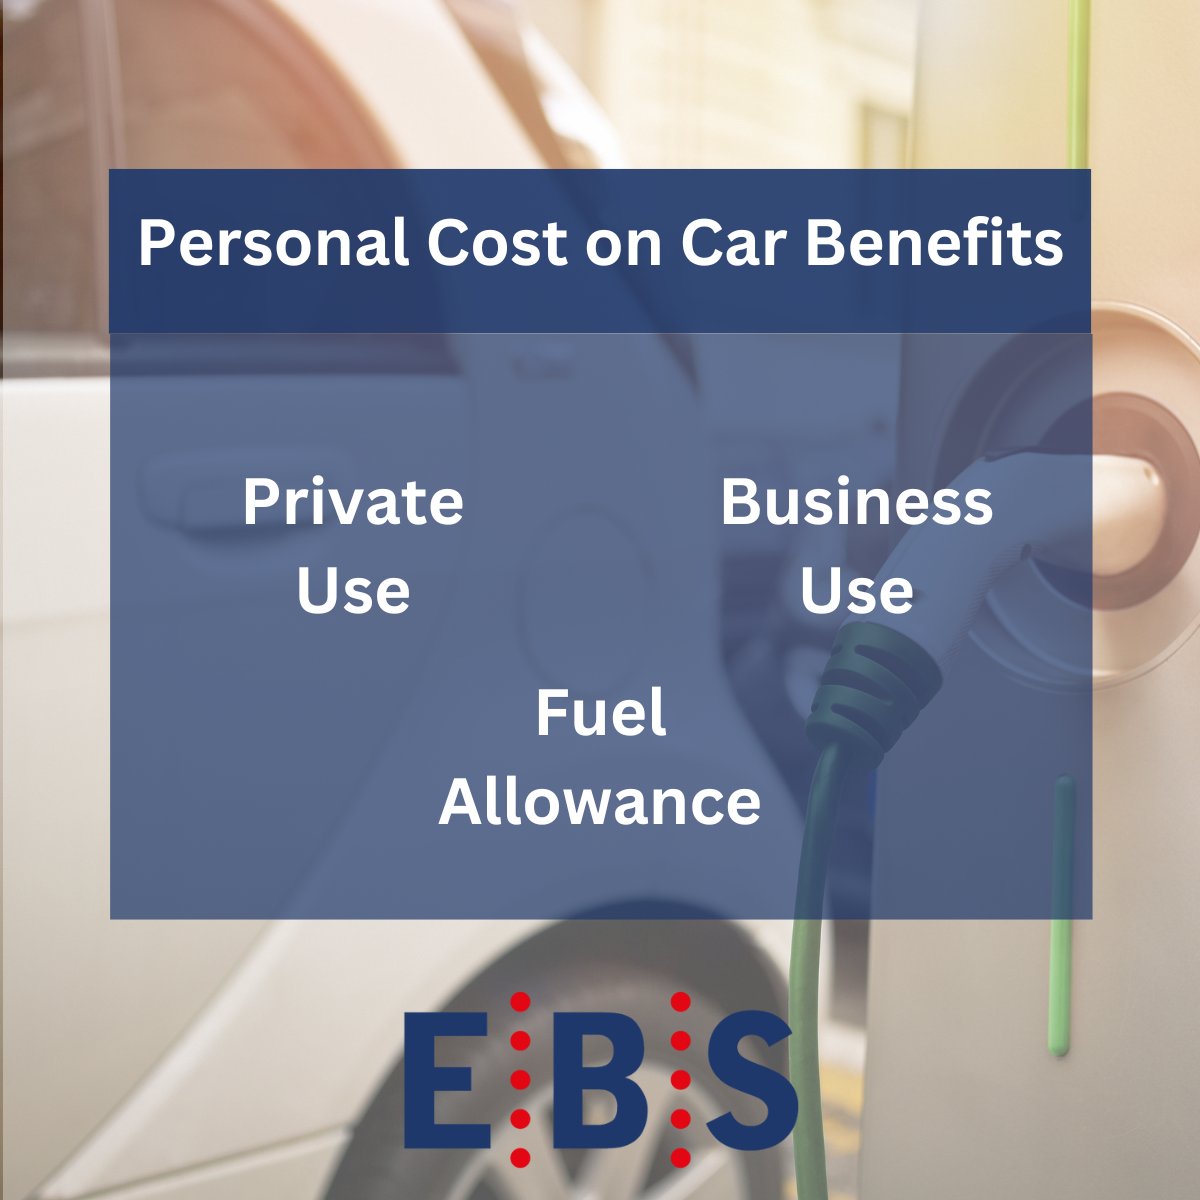 Do you have a company car? 

If so, you'll want to read our article on car benefits: bit.ly/3Uj4ReW

The piece includes information on taxable benefits, tax on fuel, and tax-free allowances. 

#CarBenefits #CompanyCar #FuelTax